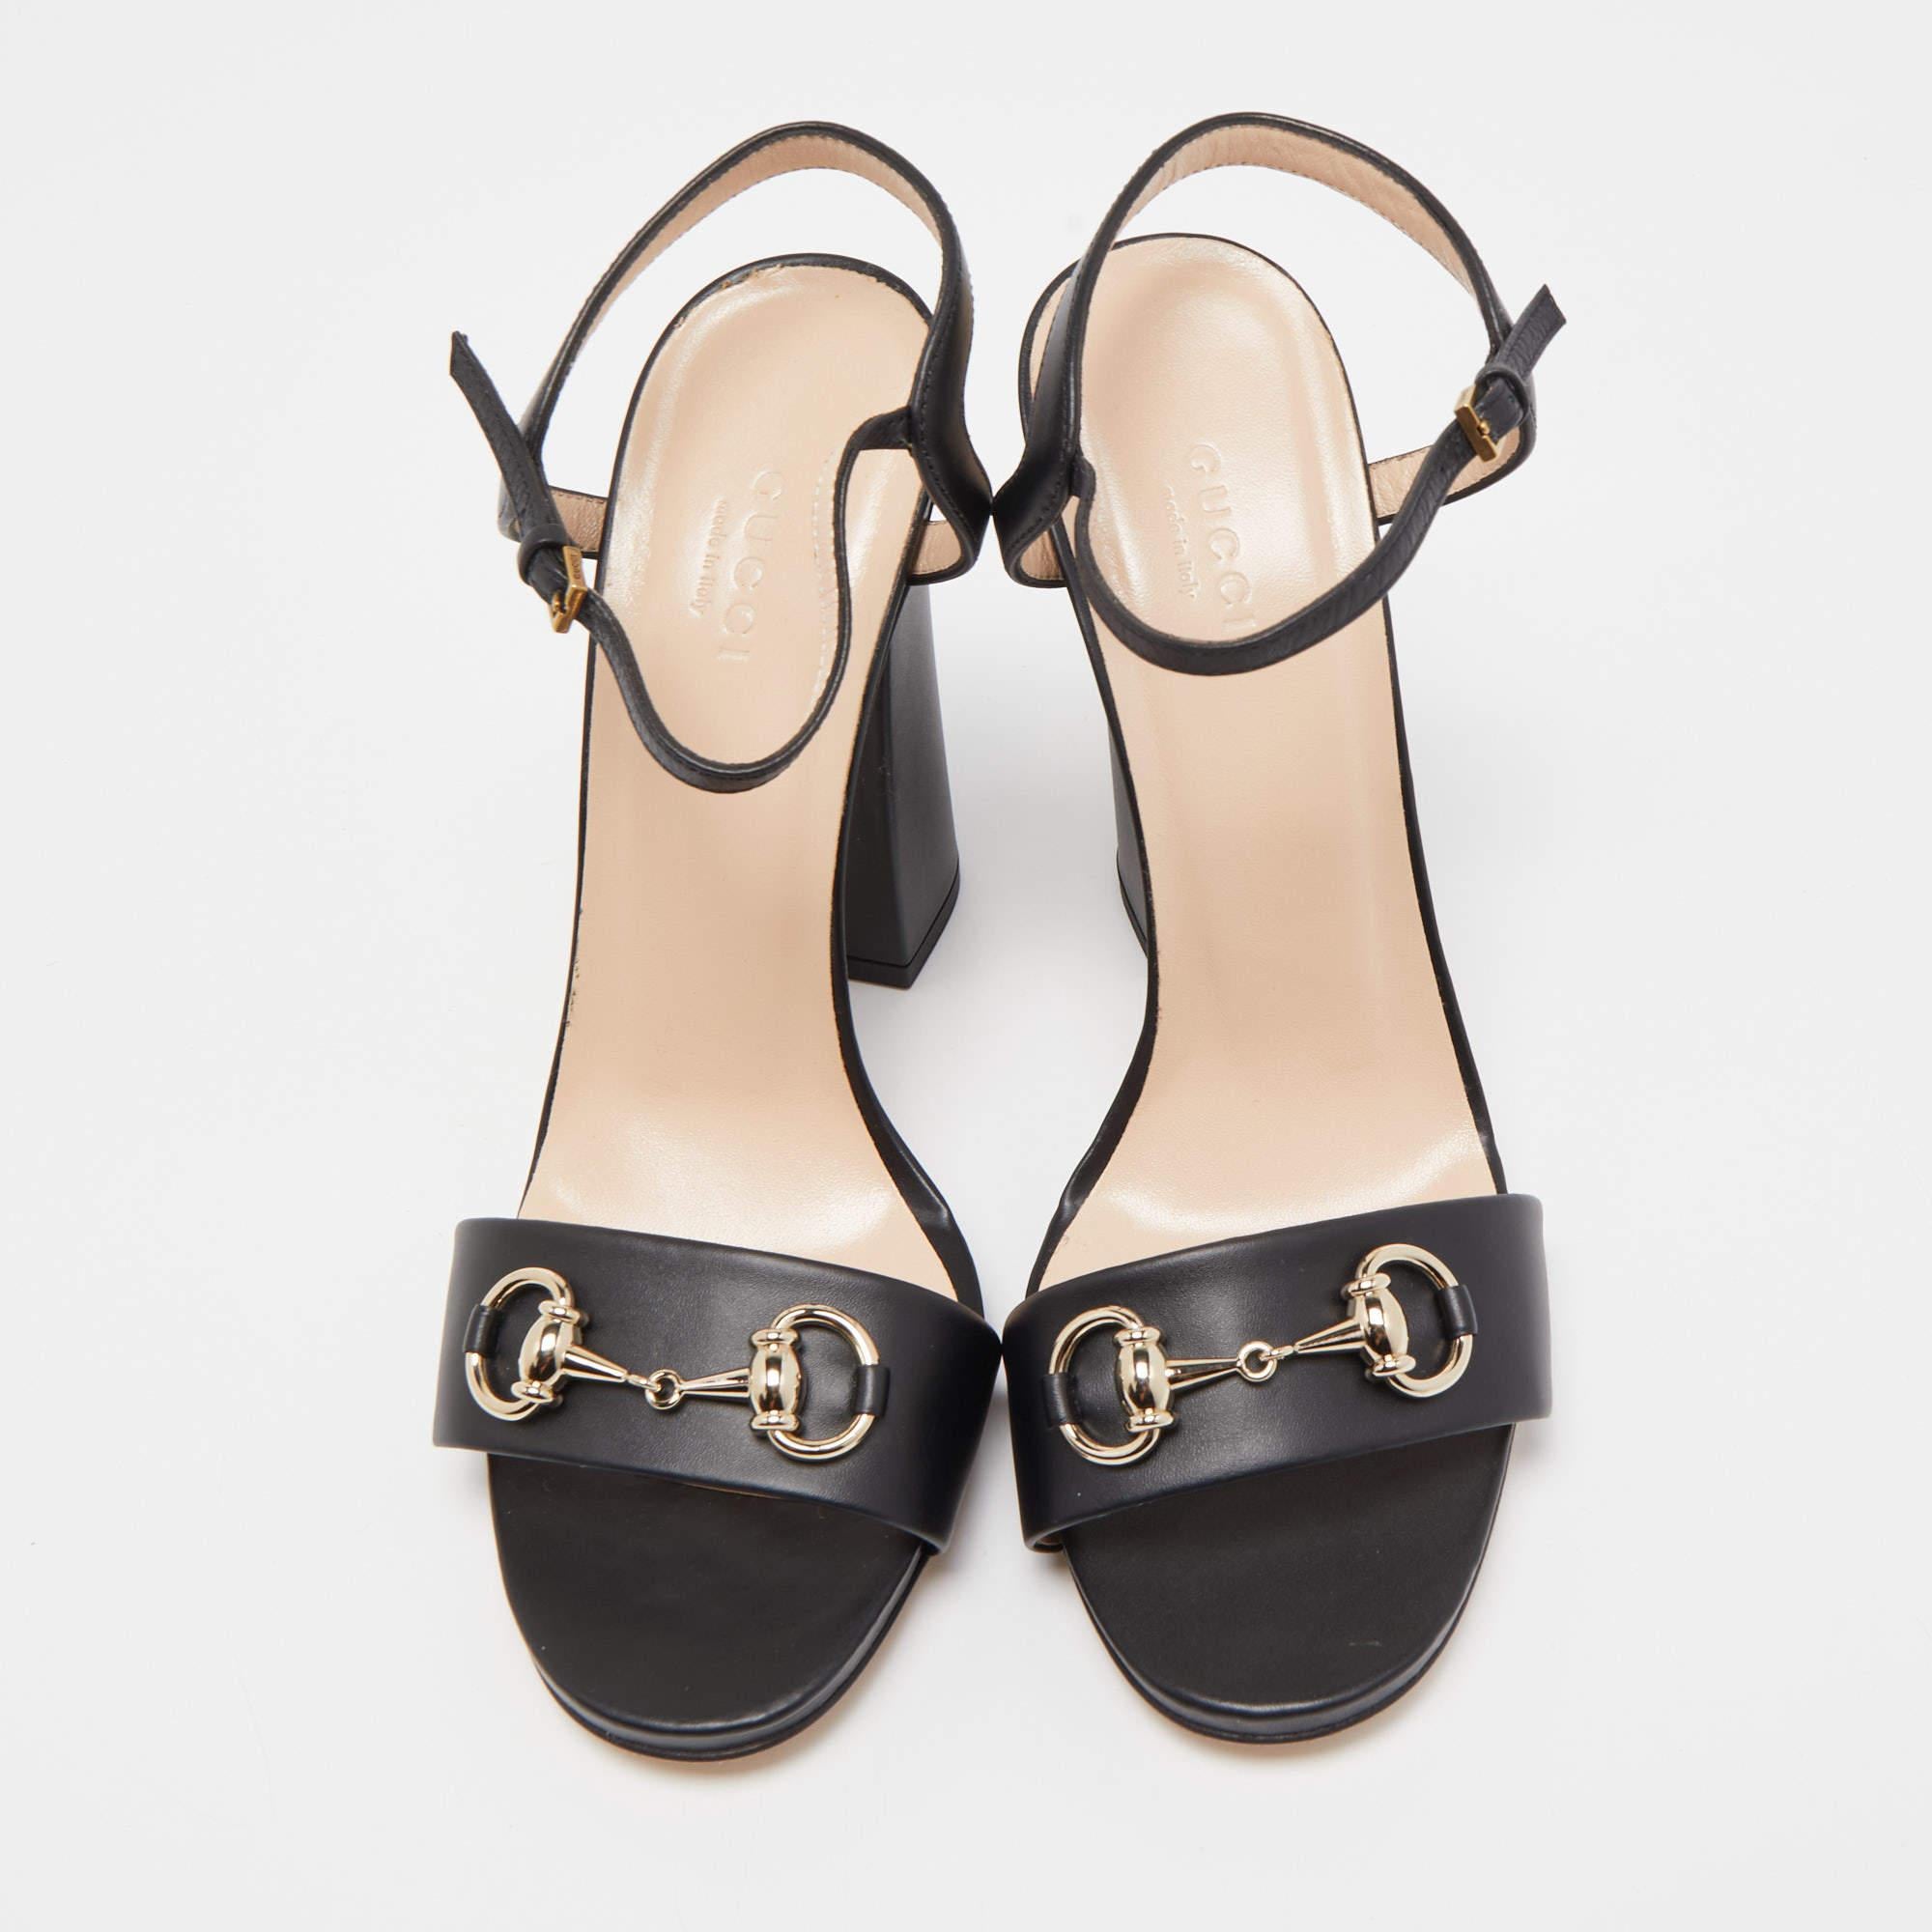 How lovely are these sandals from Gucci! They've been beautifully crafted from leather and styled with Horsebit motifs on the uppers. They carry open-toes, ankle straps and block heels. Let this pair lift your outfits by owning them